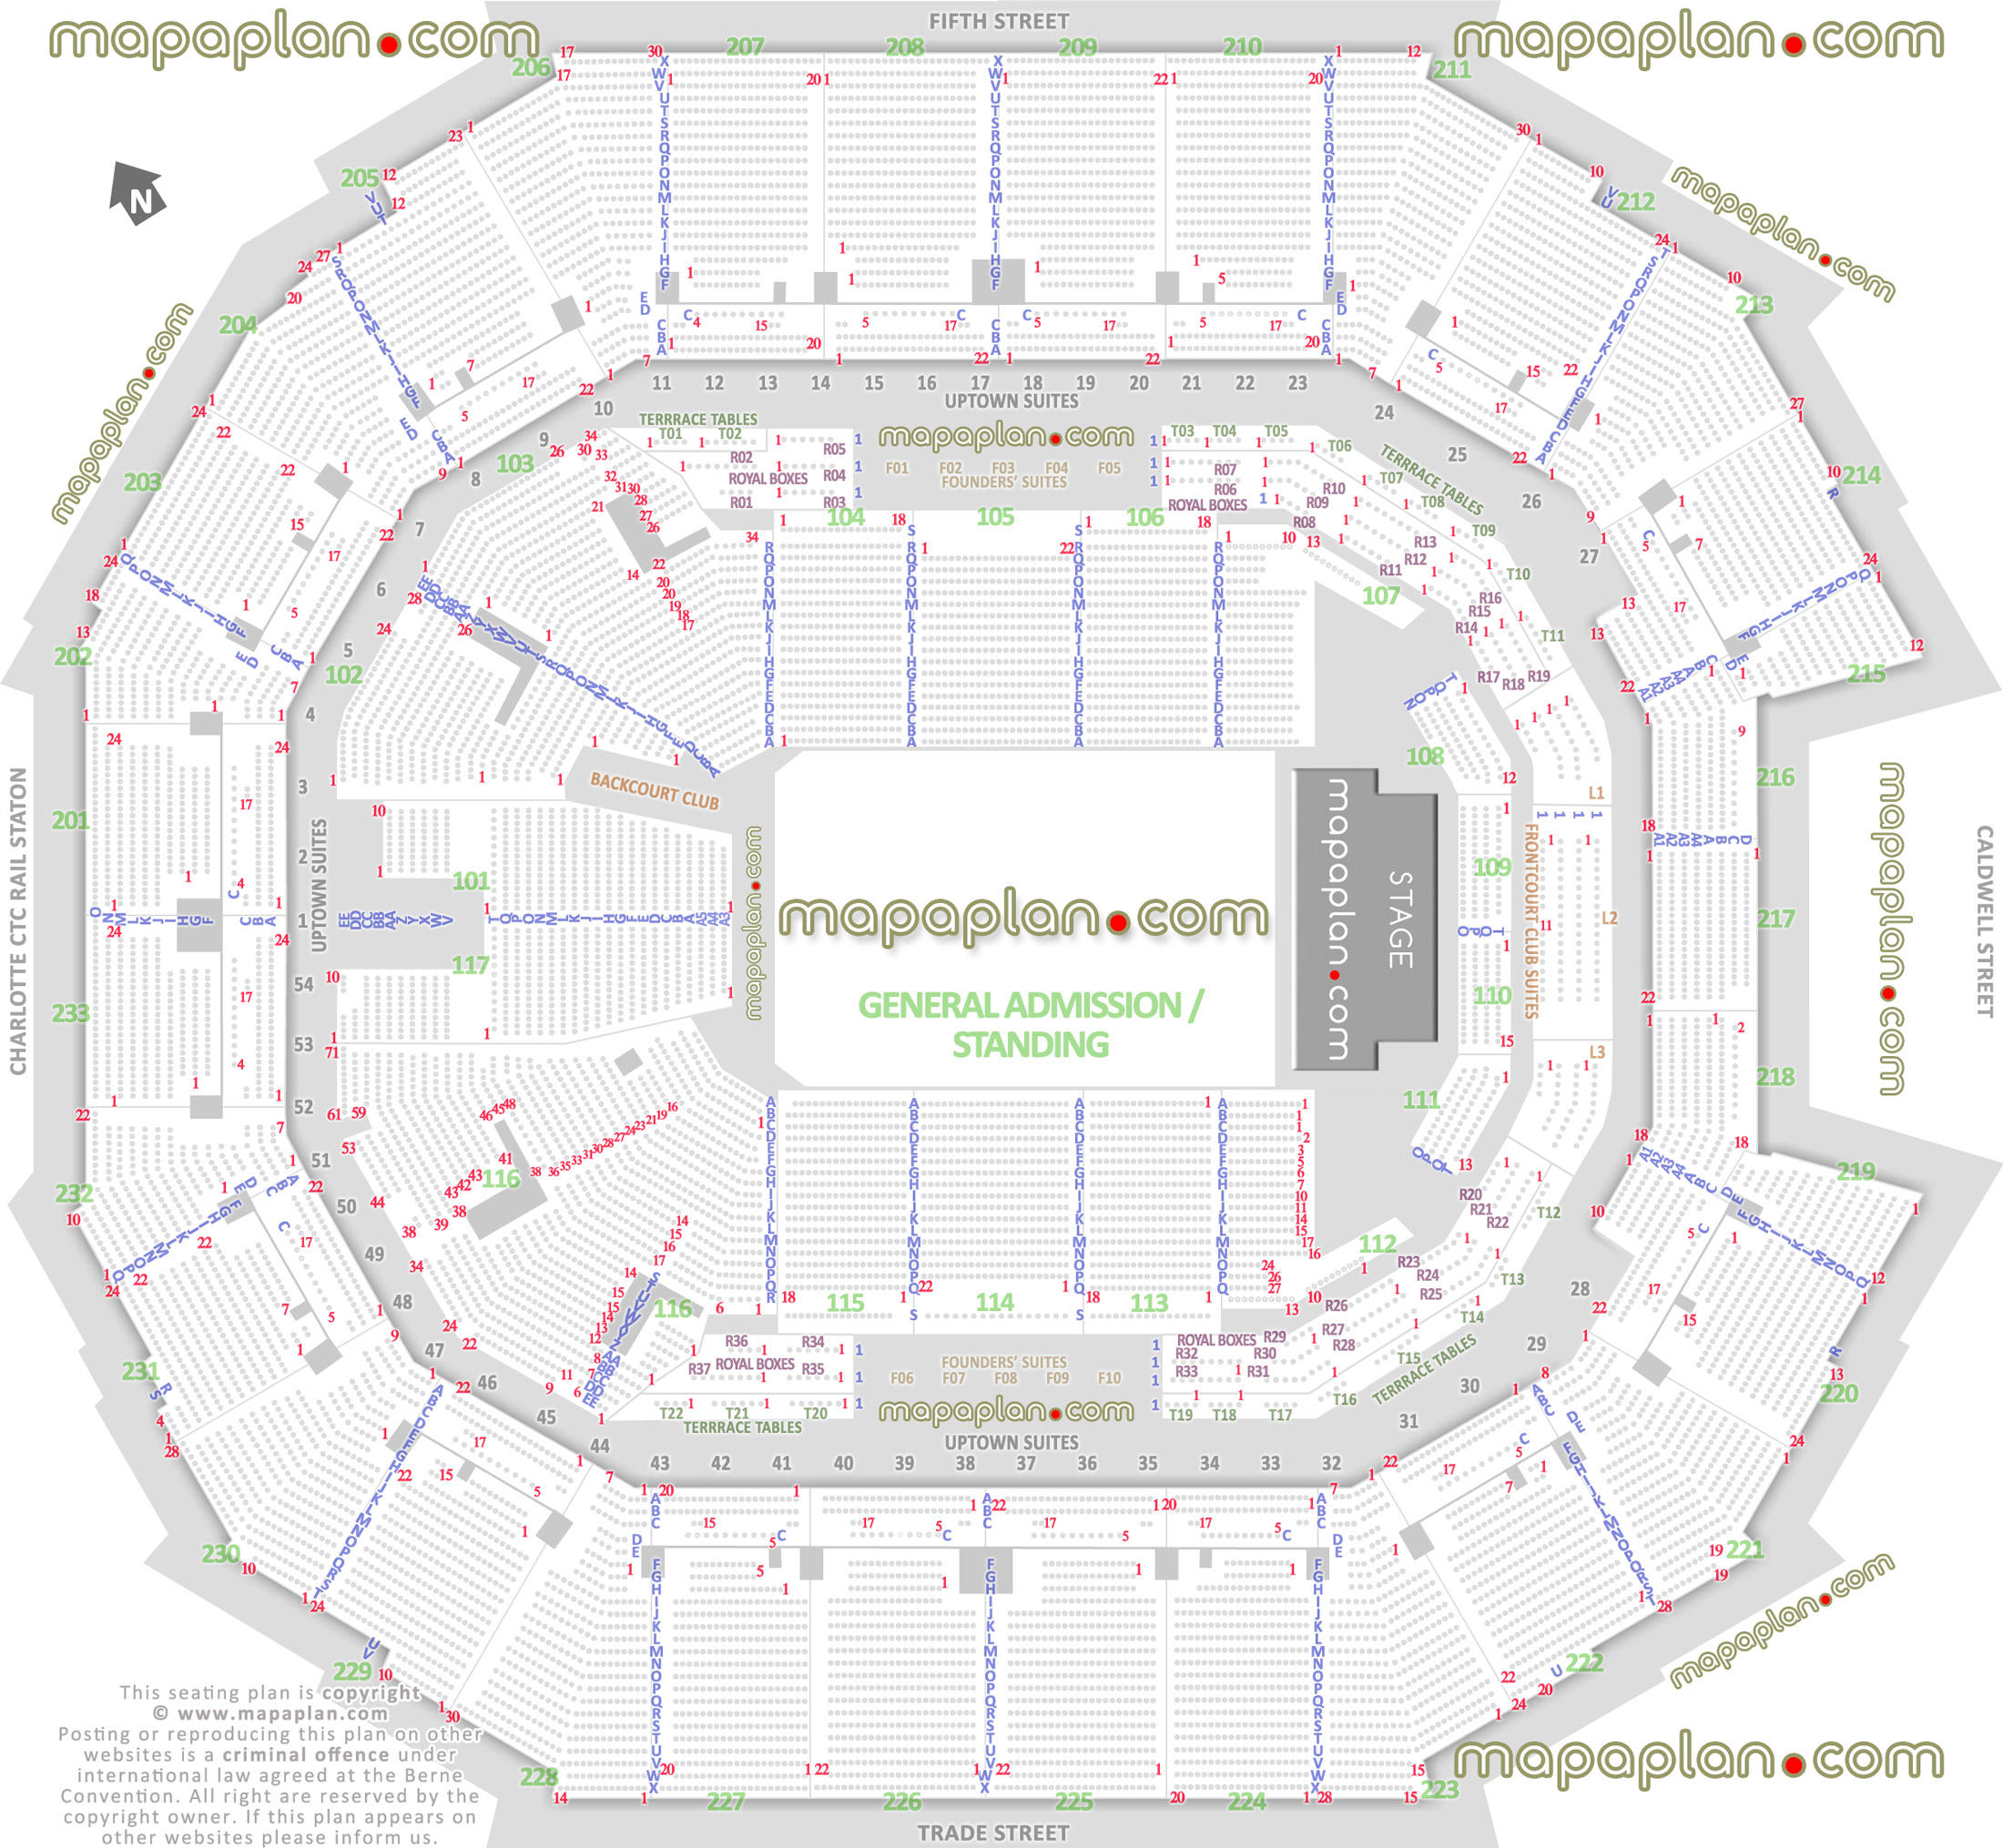 general admission ga floor standing concert capacity plan time warner cable arena nc concert stage detailed floor pit plan sections best seat selection information guide virtual interactive image map rows a b c d e f g h i j k l m n o p q r s t u v w x y z aa bb cc dd ee Charlotte Spectrum Center seating chart